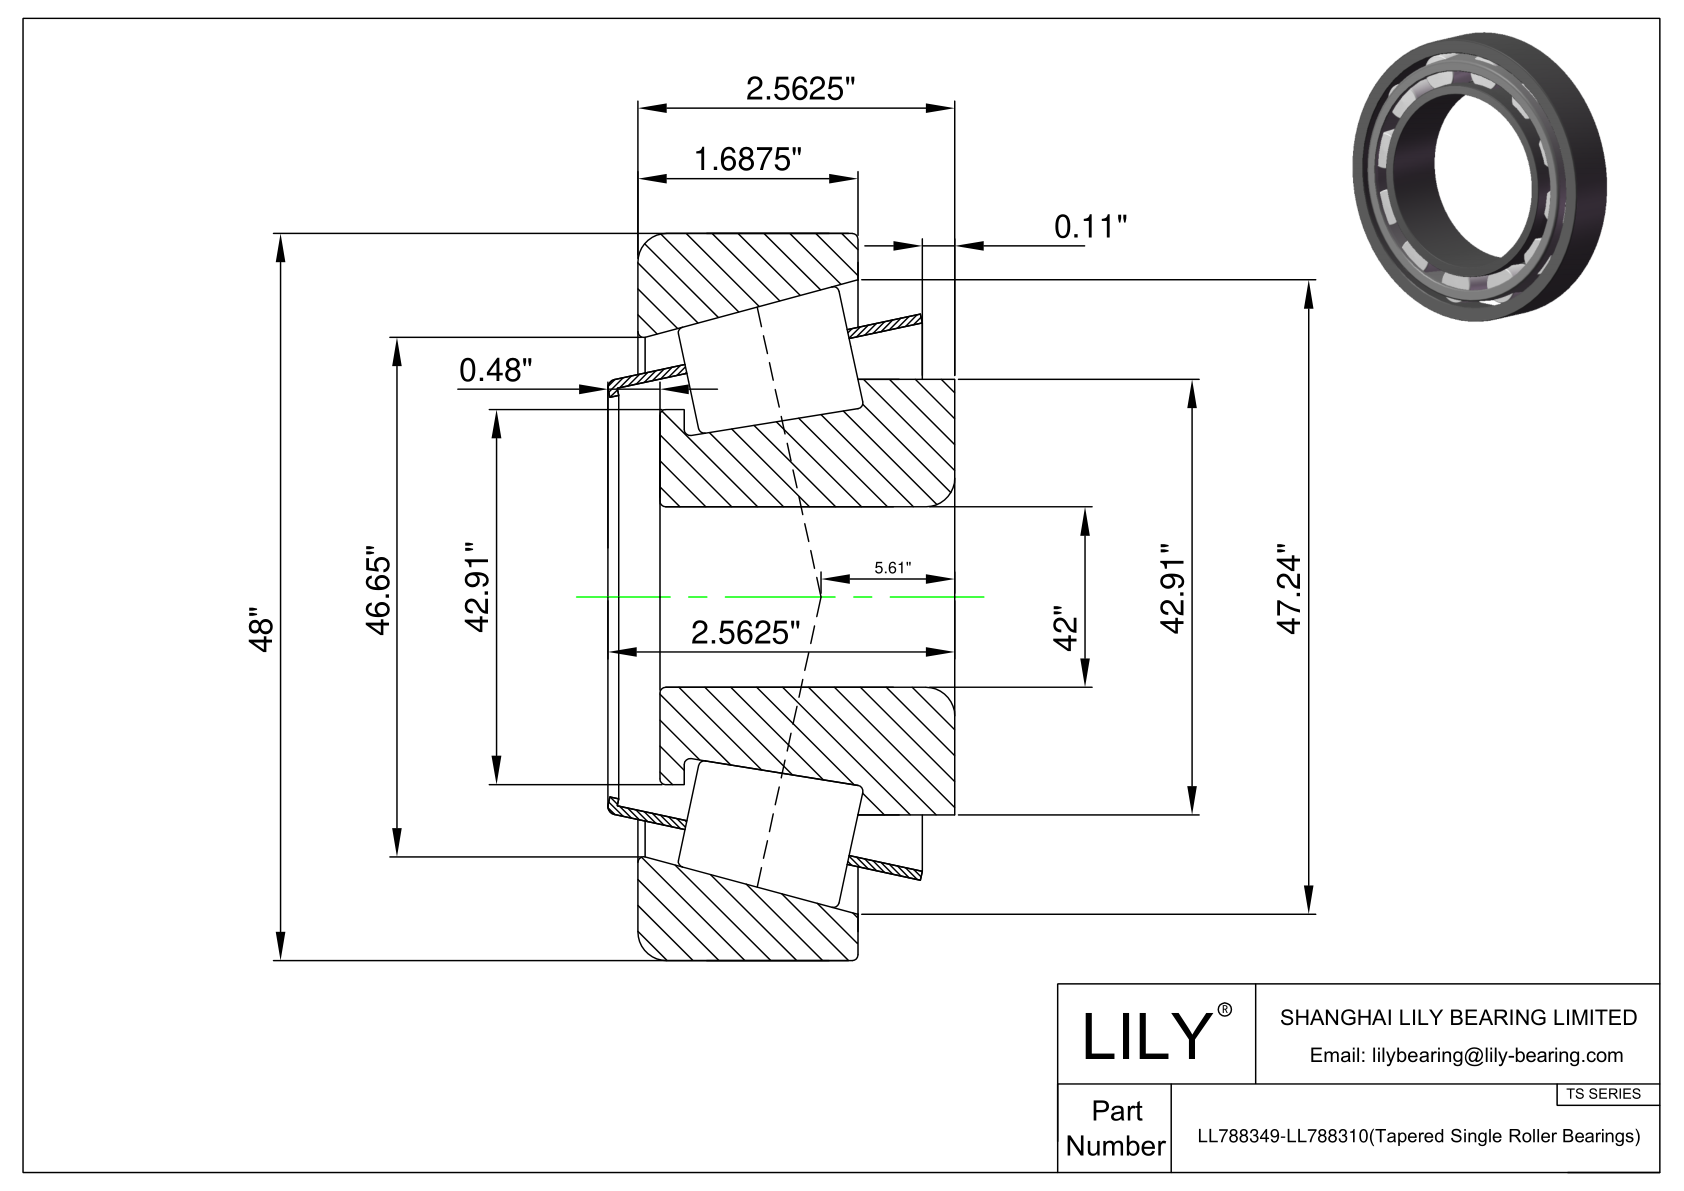 LL788349-LL788310 TS (Tapered Single Roller Bearings) (Imperial) cad drawing